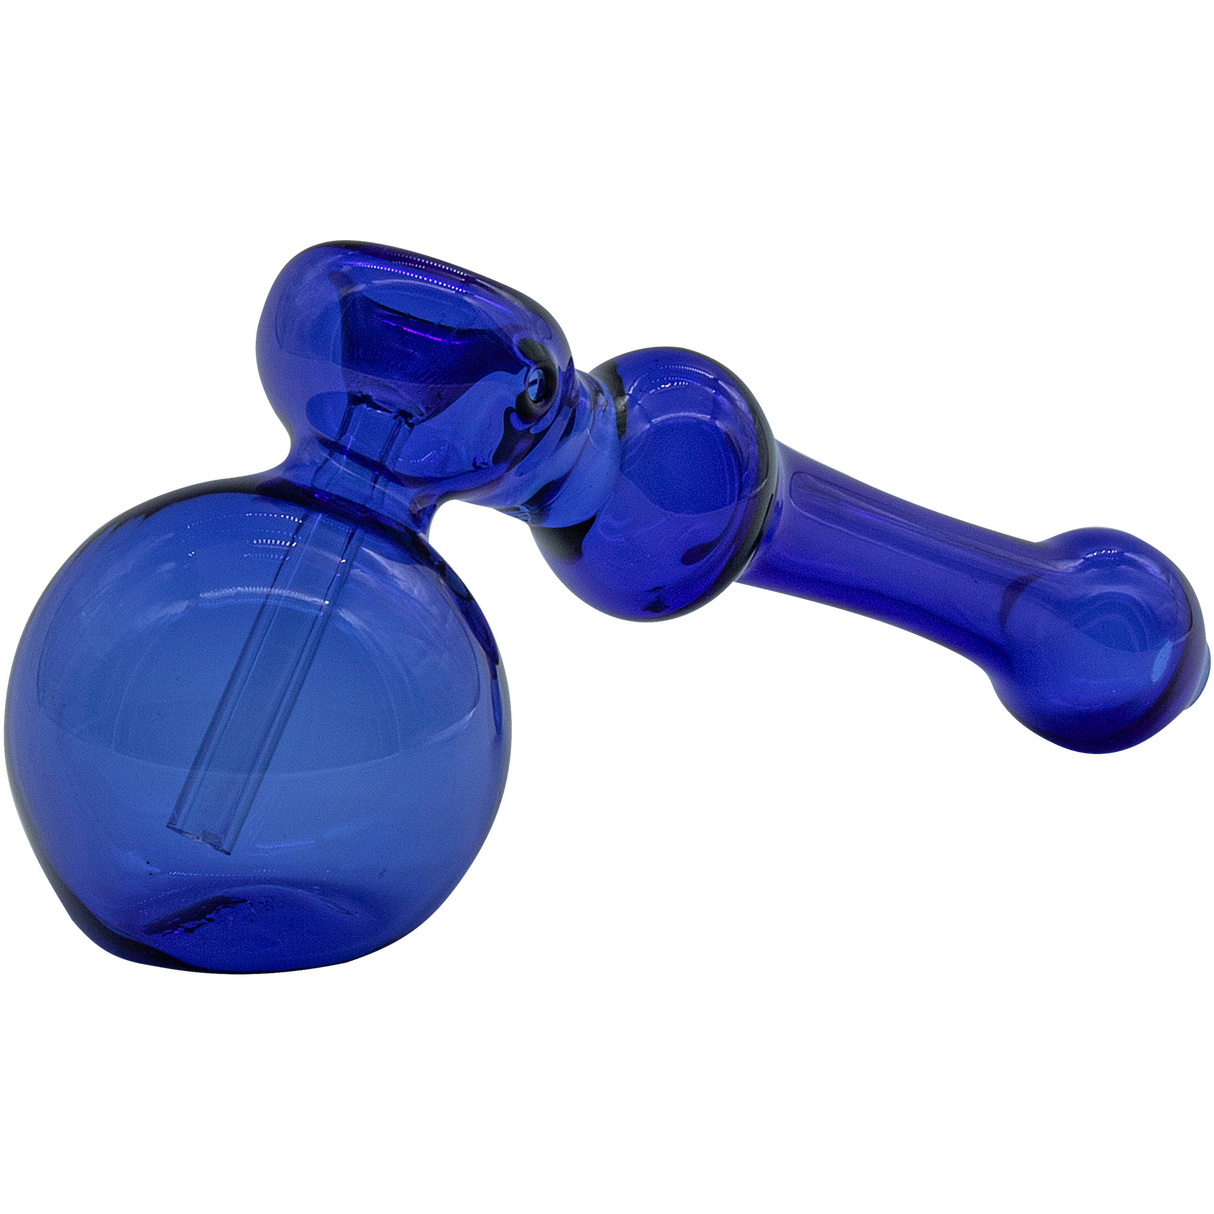 LA Pipes Cobalt Blue Glass Hammer Bubbler Pipe, 6" Borosilicate, for Dry Herbs